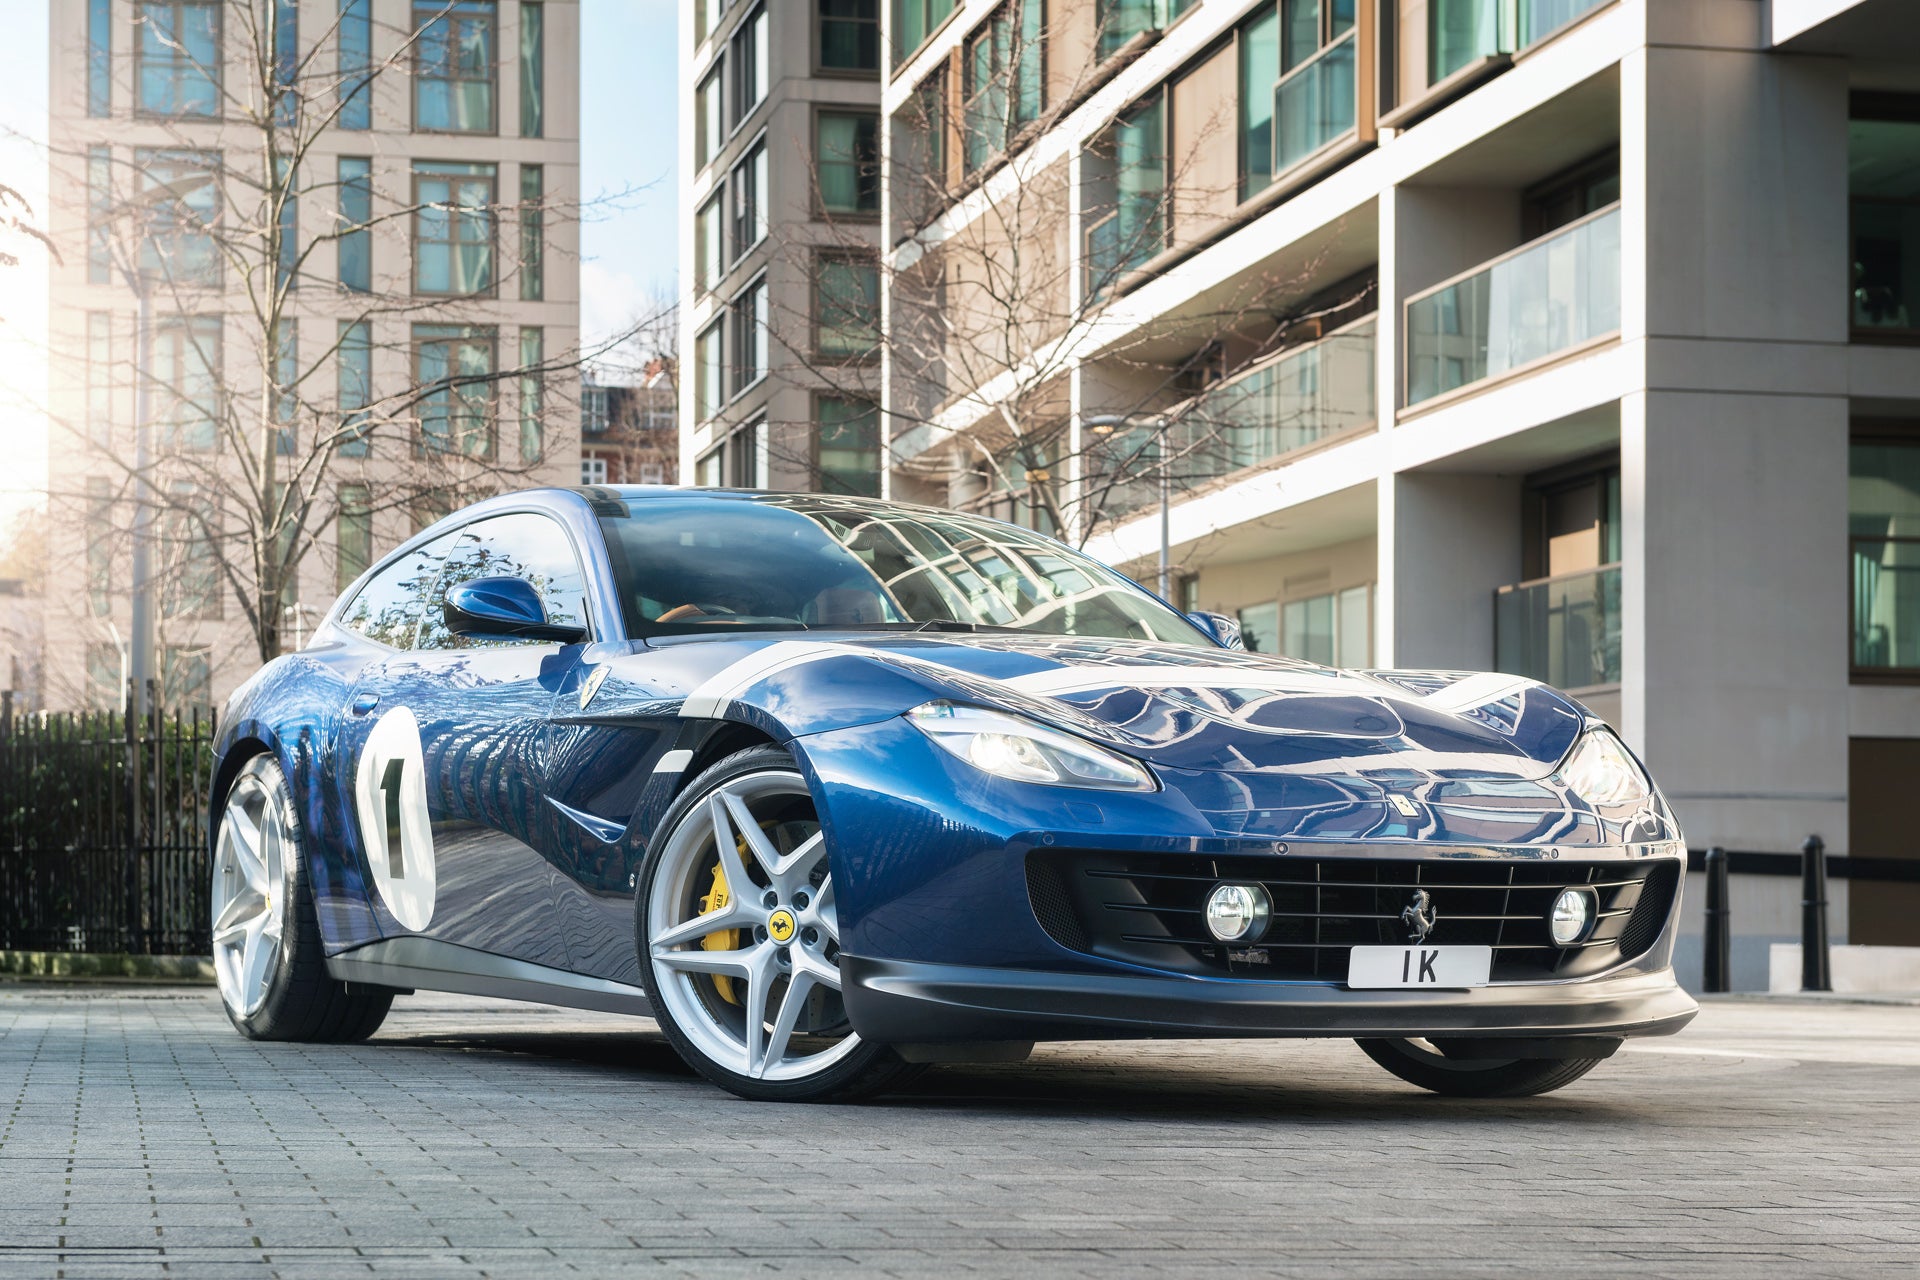 TAILOR-MADE: GTC4LUSSO //PK - 01